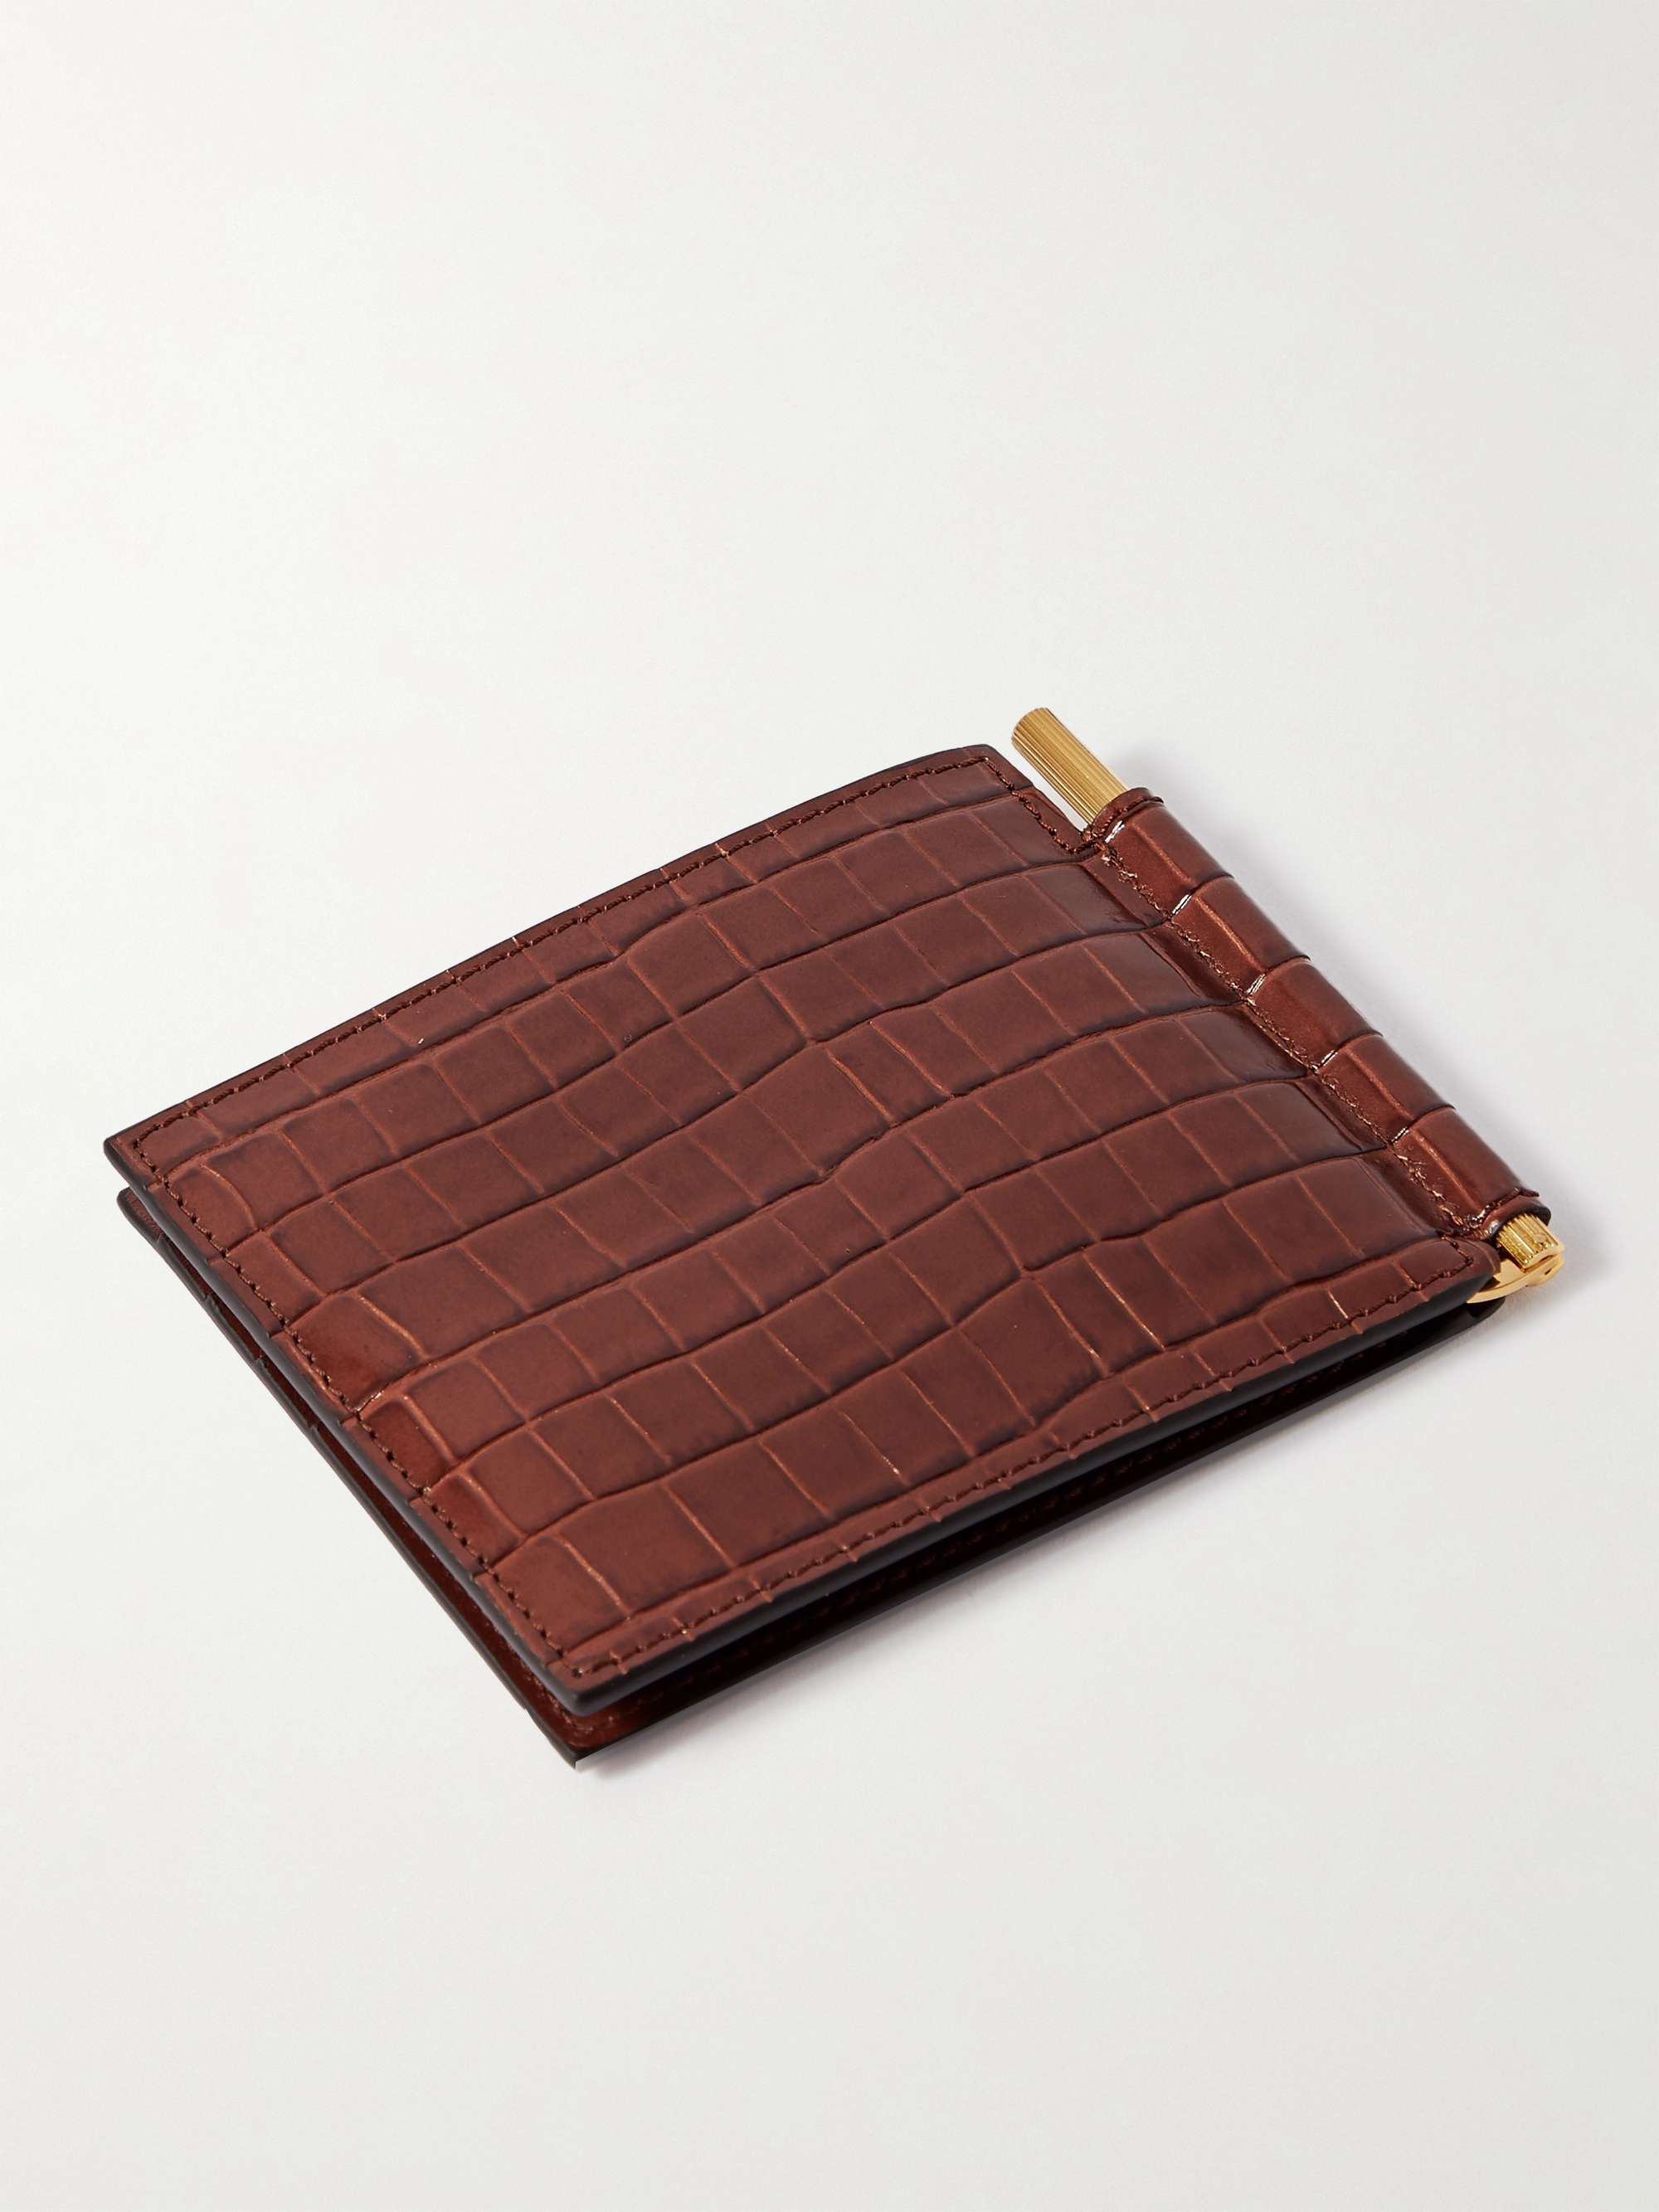 TOM FORD Croc-Effect Leather Bifold Wallet with Money Clip